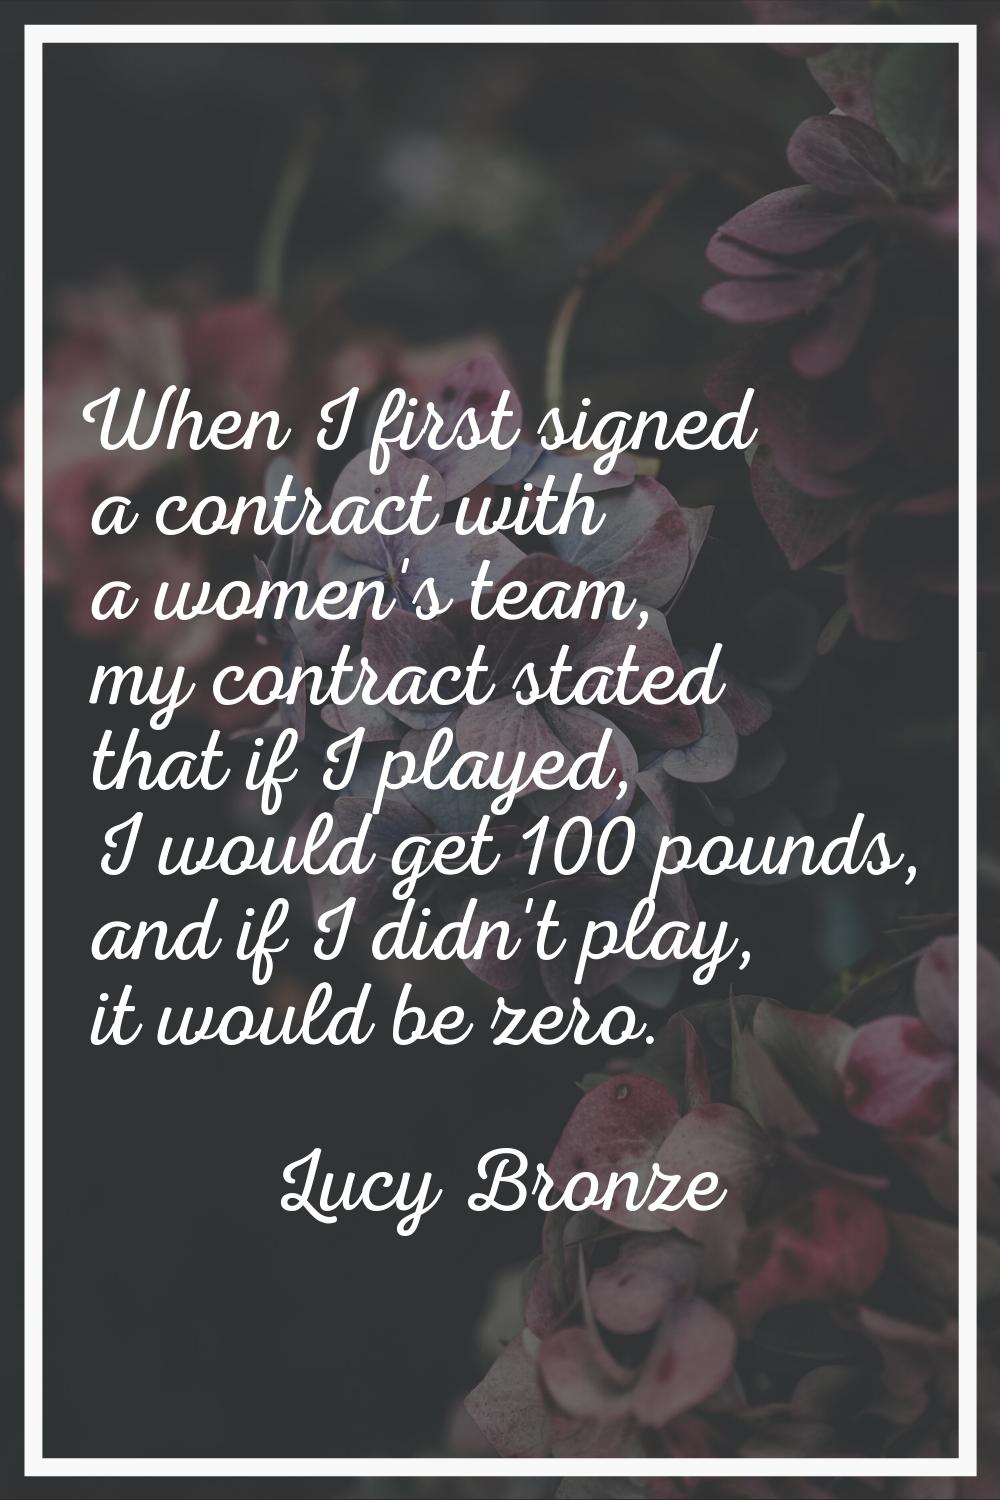 When I first signed a contract with a women's team, my contract stated that if I played, I would ge